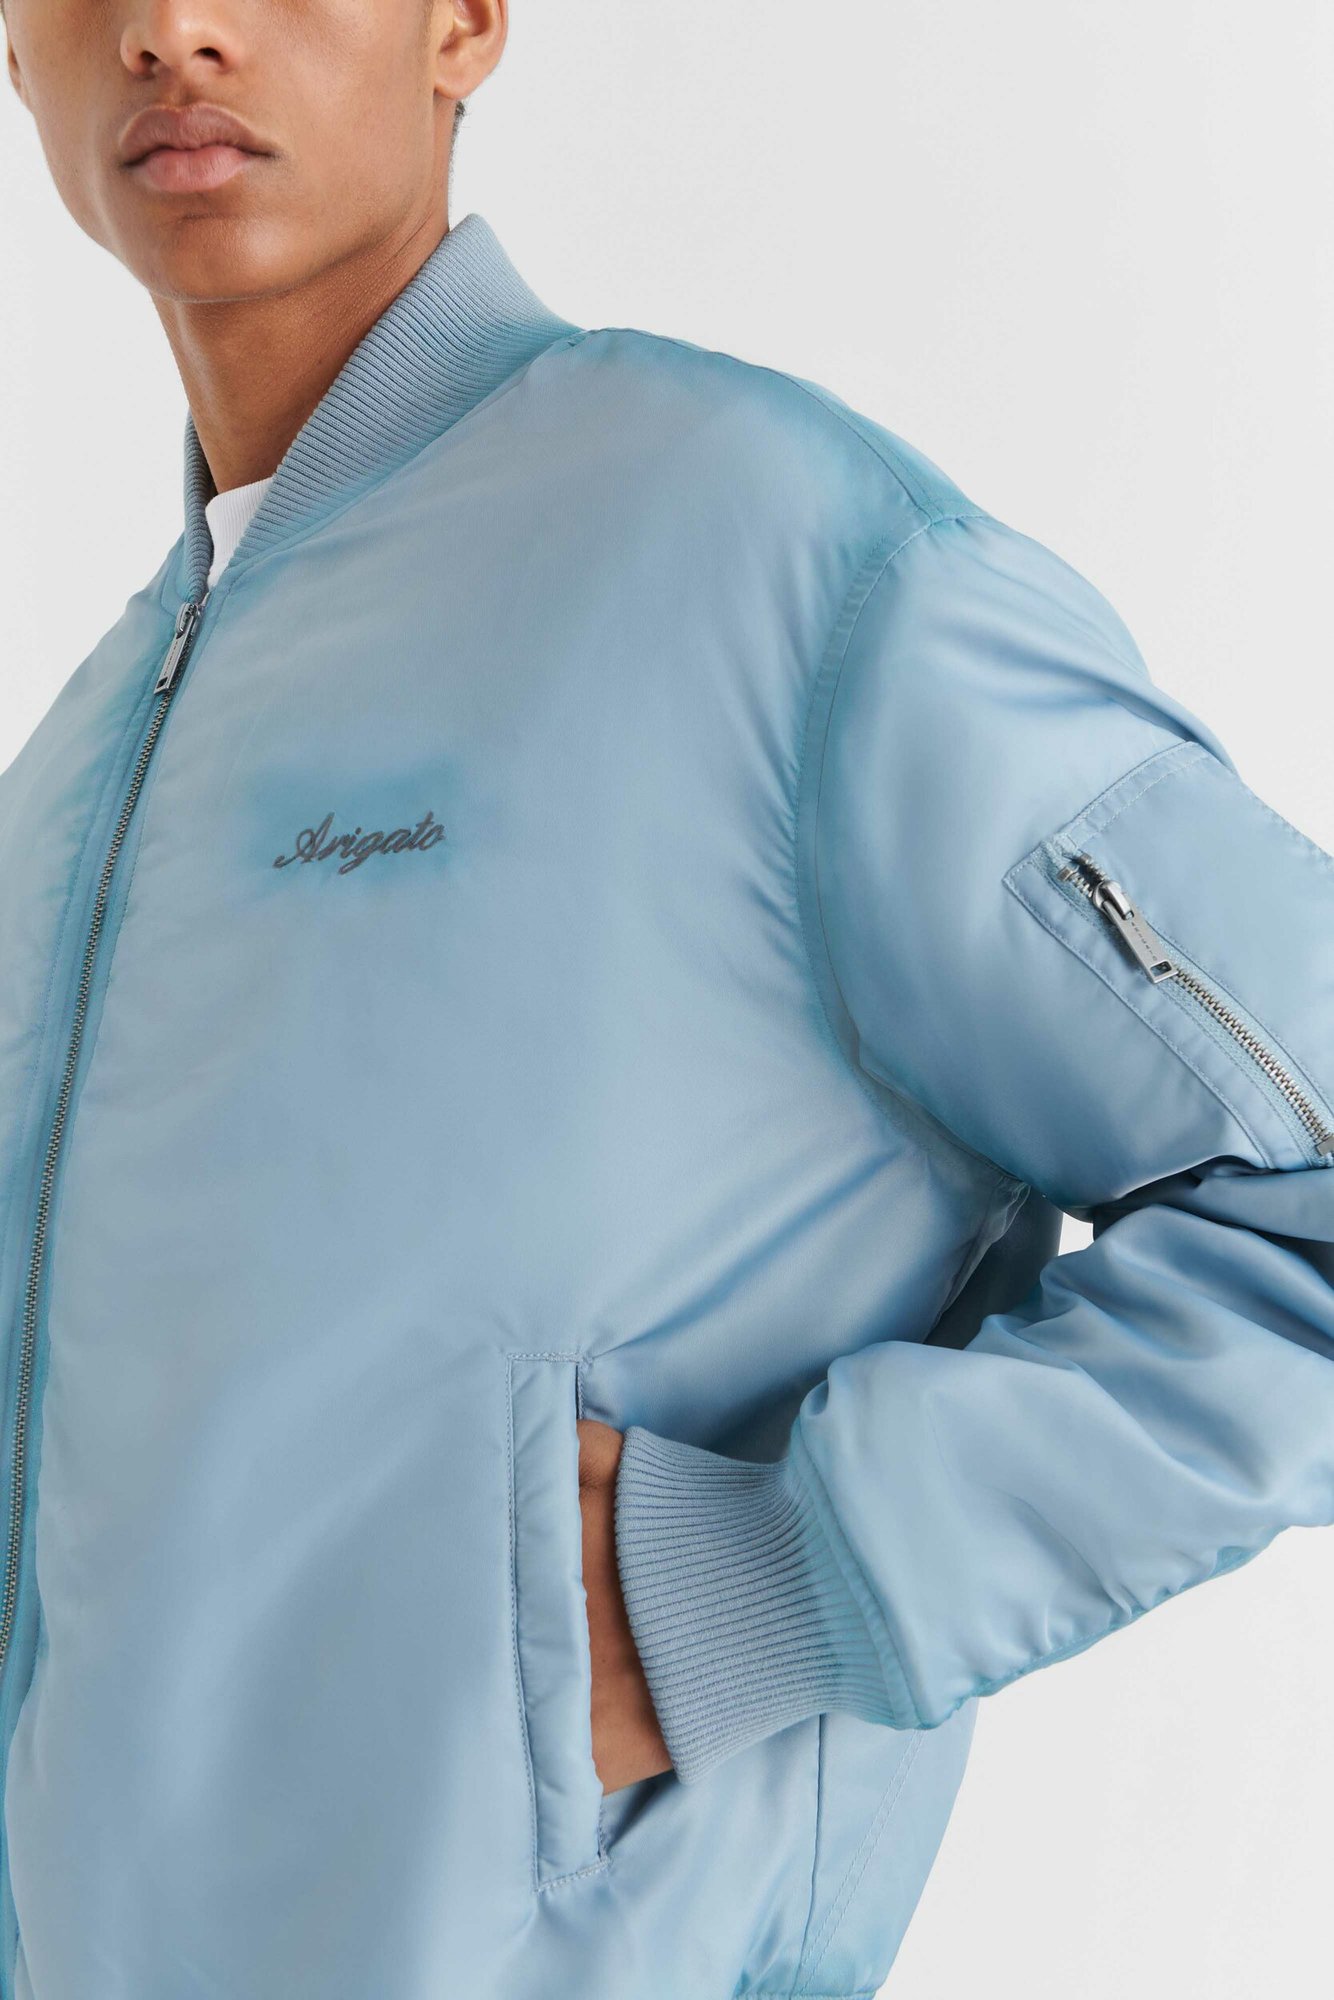 AXEL ARIGATO Annex Bomber Jacket in Bleached Blue XL